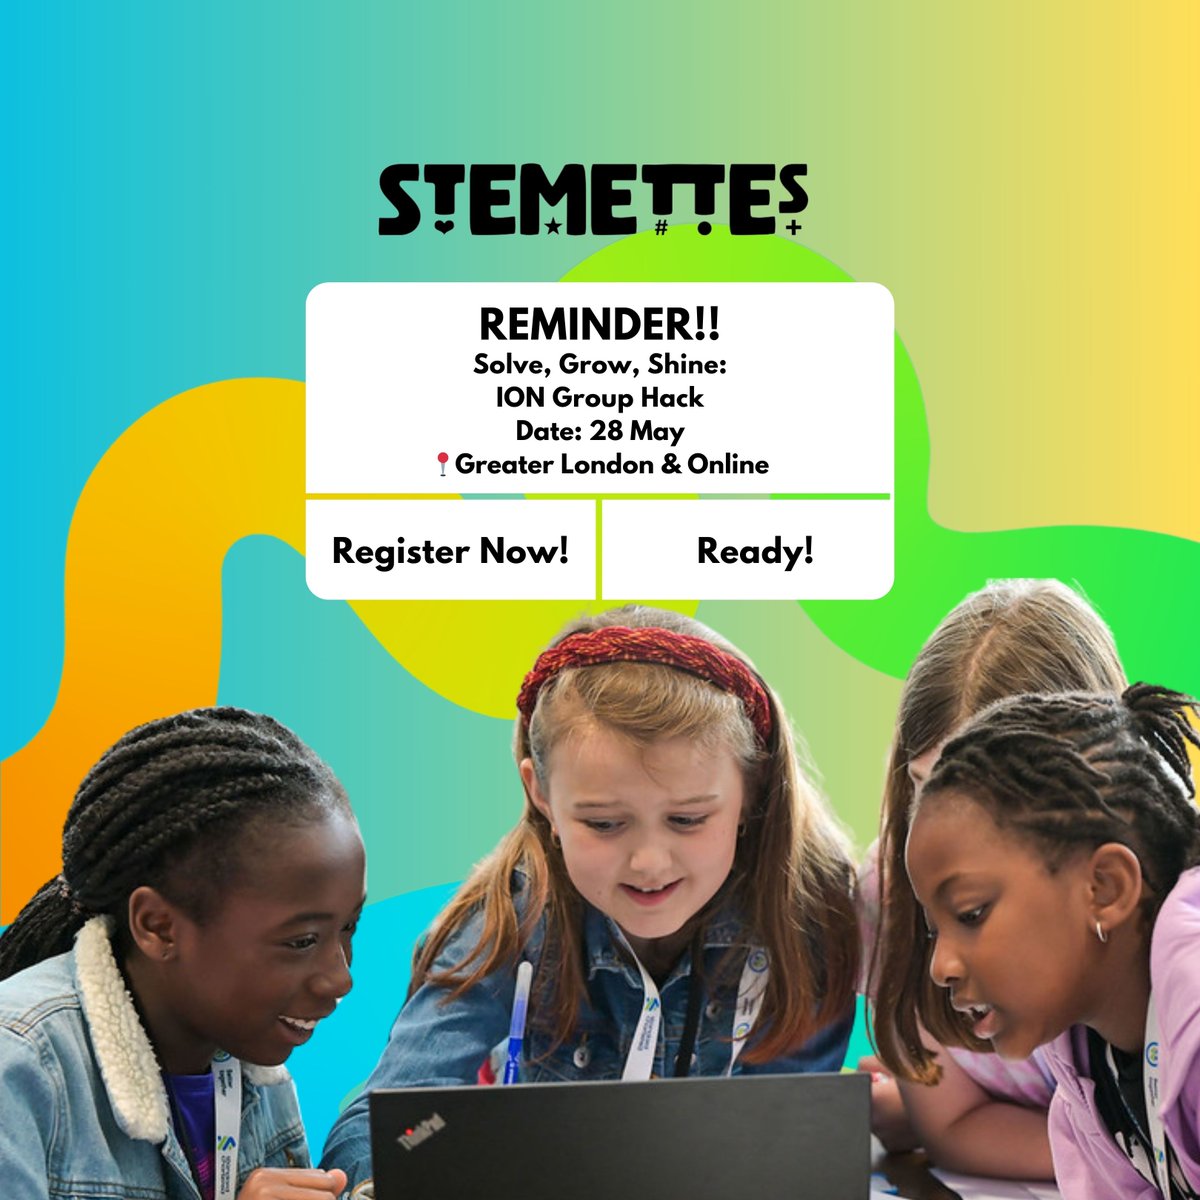 🌟 Event reminder‼️ Team up with us and @iongroup for an electrifying AI #hackathon! Tackle challenges, unleash your creativity & immerse yourself in cutting-edge tech. Secure your spot now: stemettes.org/events/ion-gro… #IONGroupStemettes #PartnerStemettes